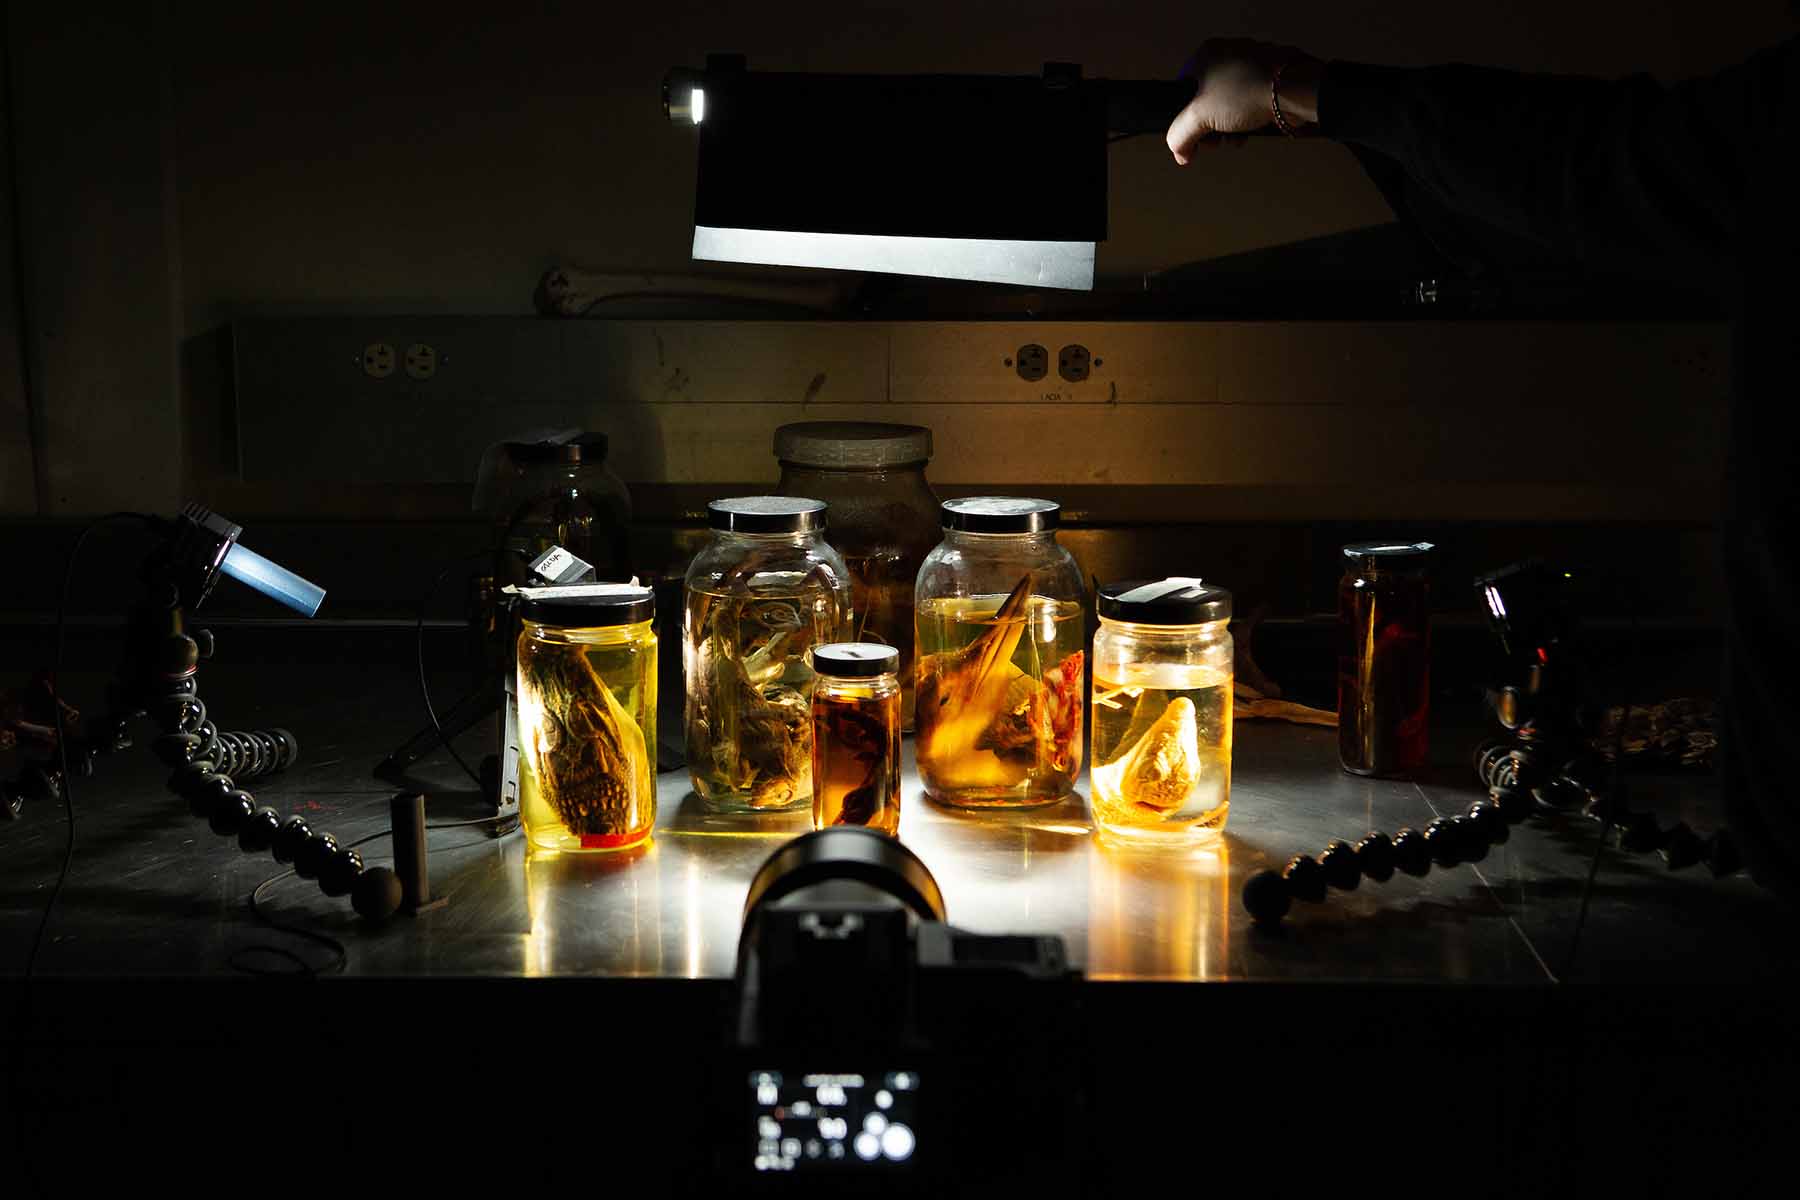 Illuminated laboratory specimens in glass jars at Dr. Witmer's lab